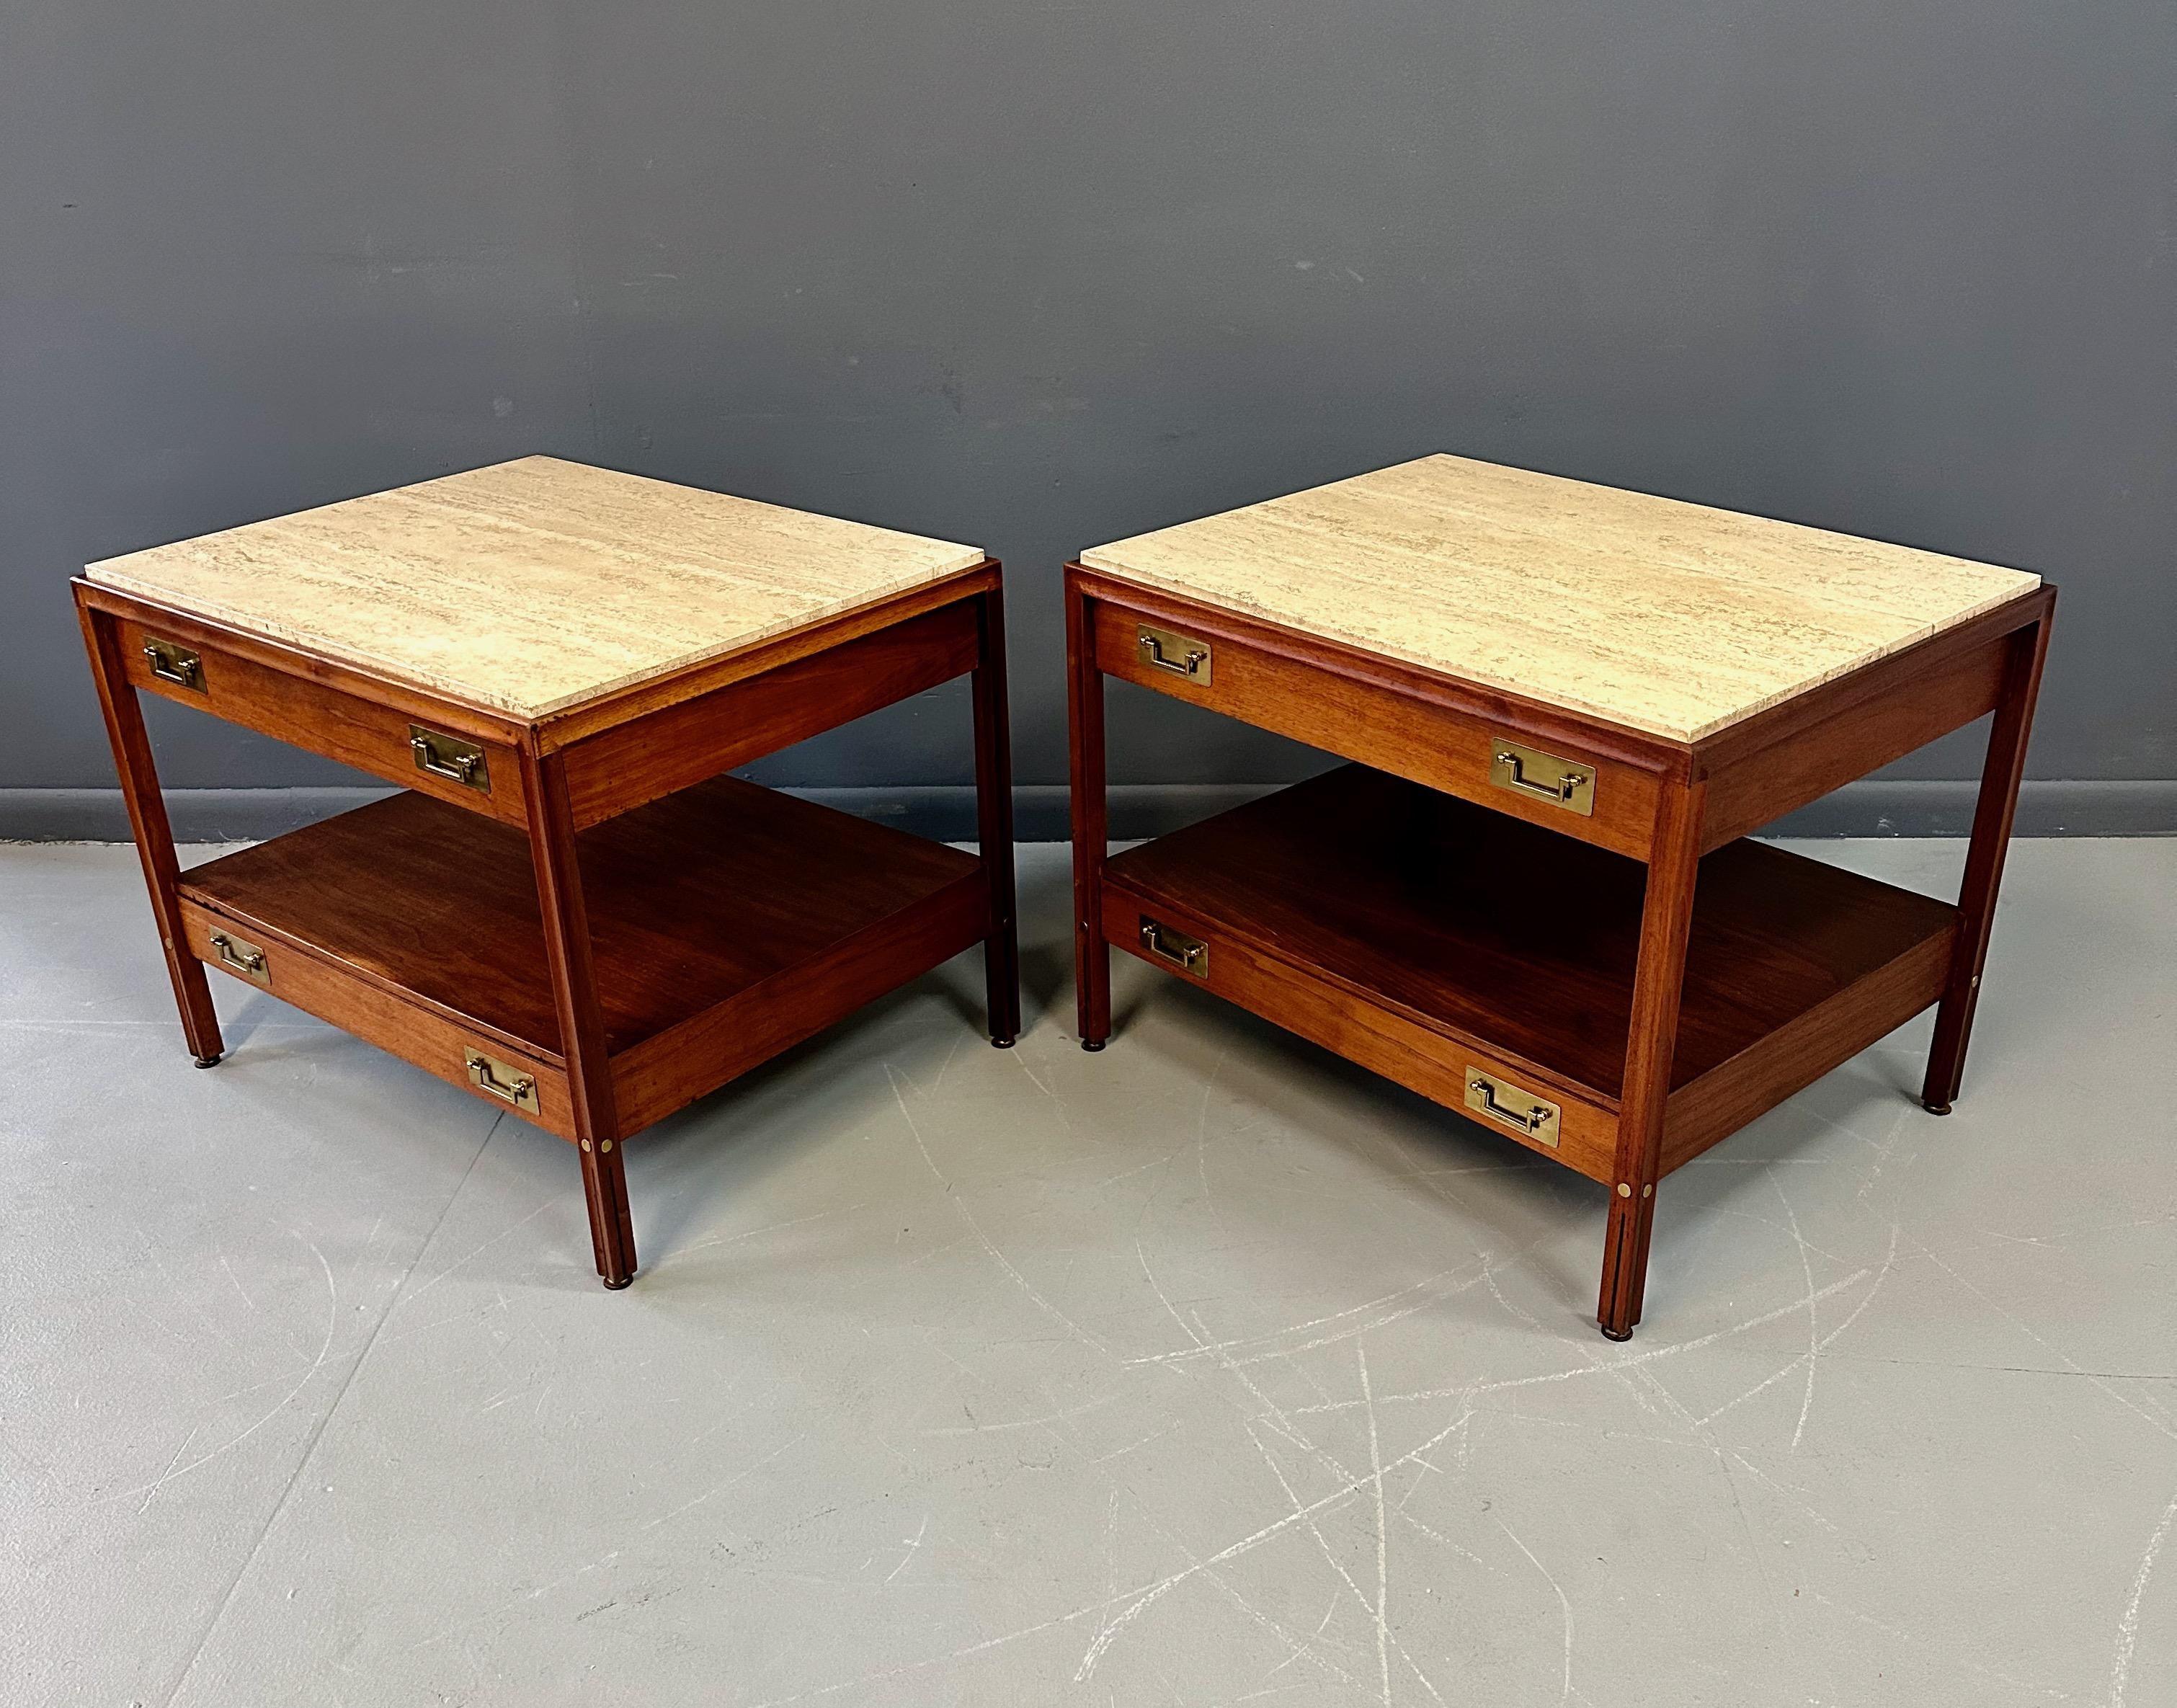 Pair of Walnut and Travertine Nightstands with Brass Accents and Rosewood Trim For Sale 3